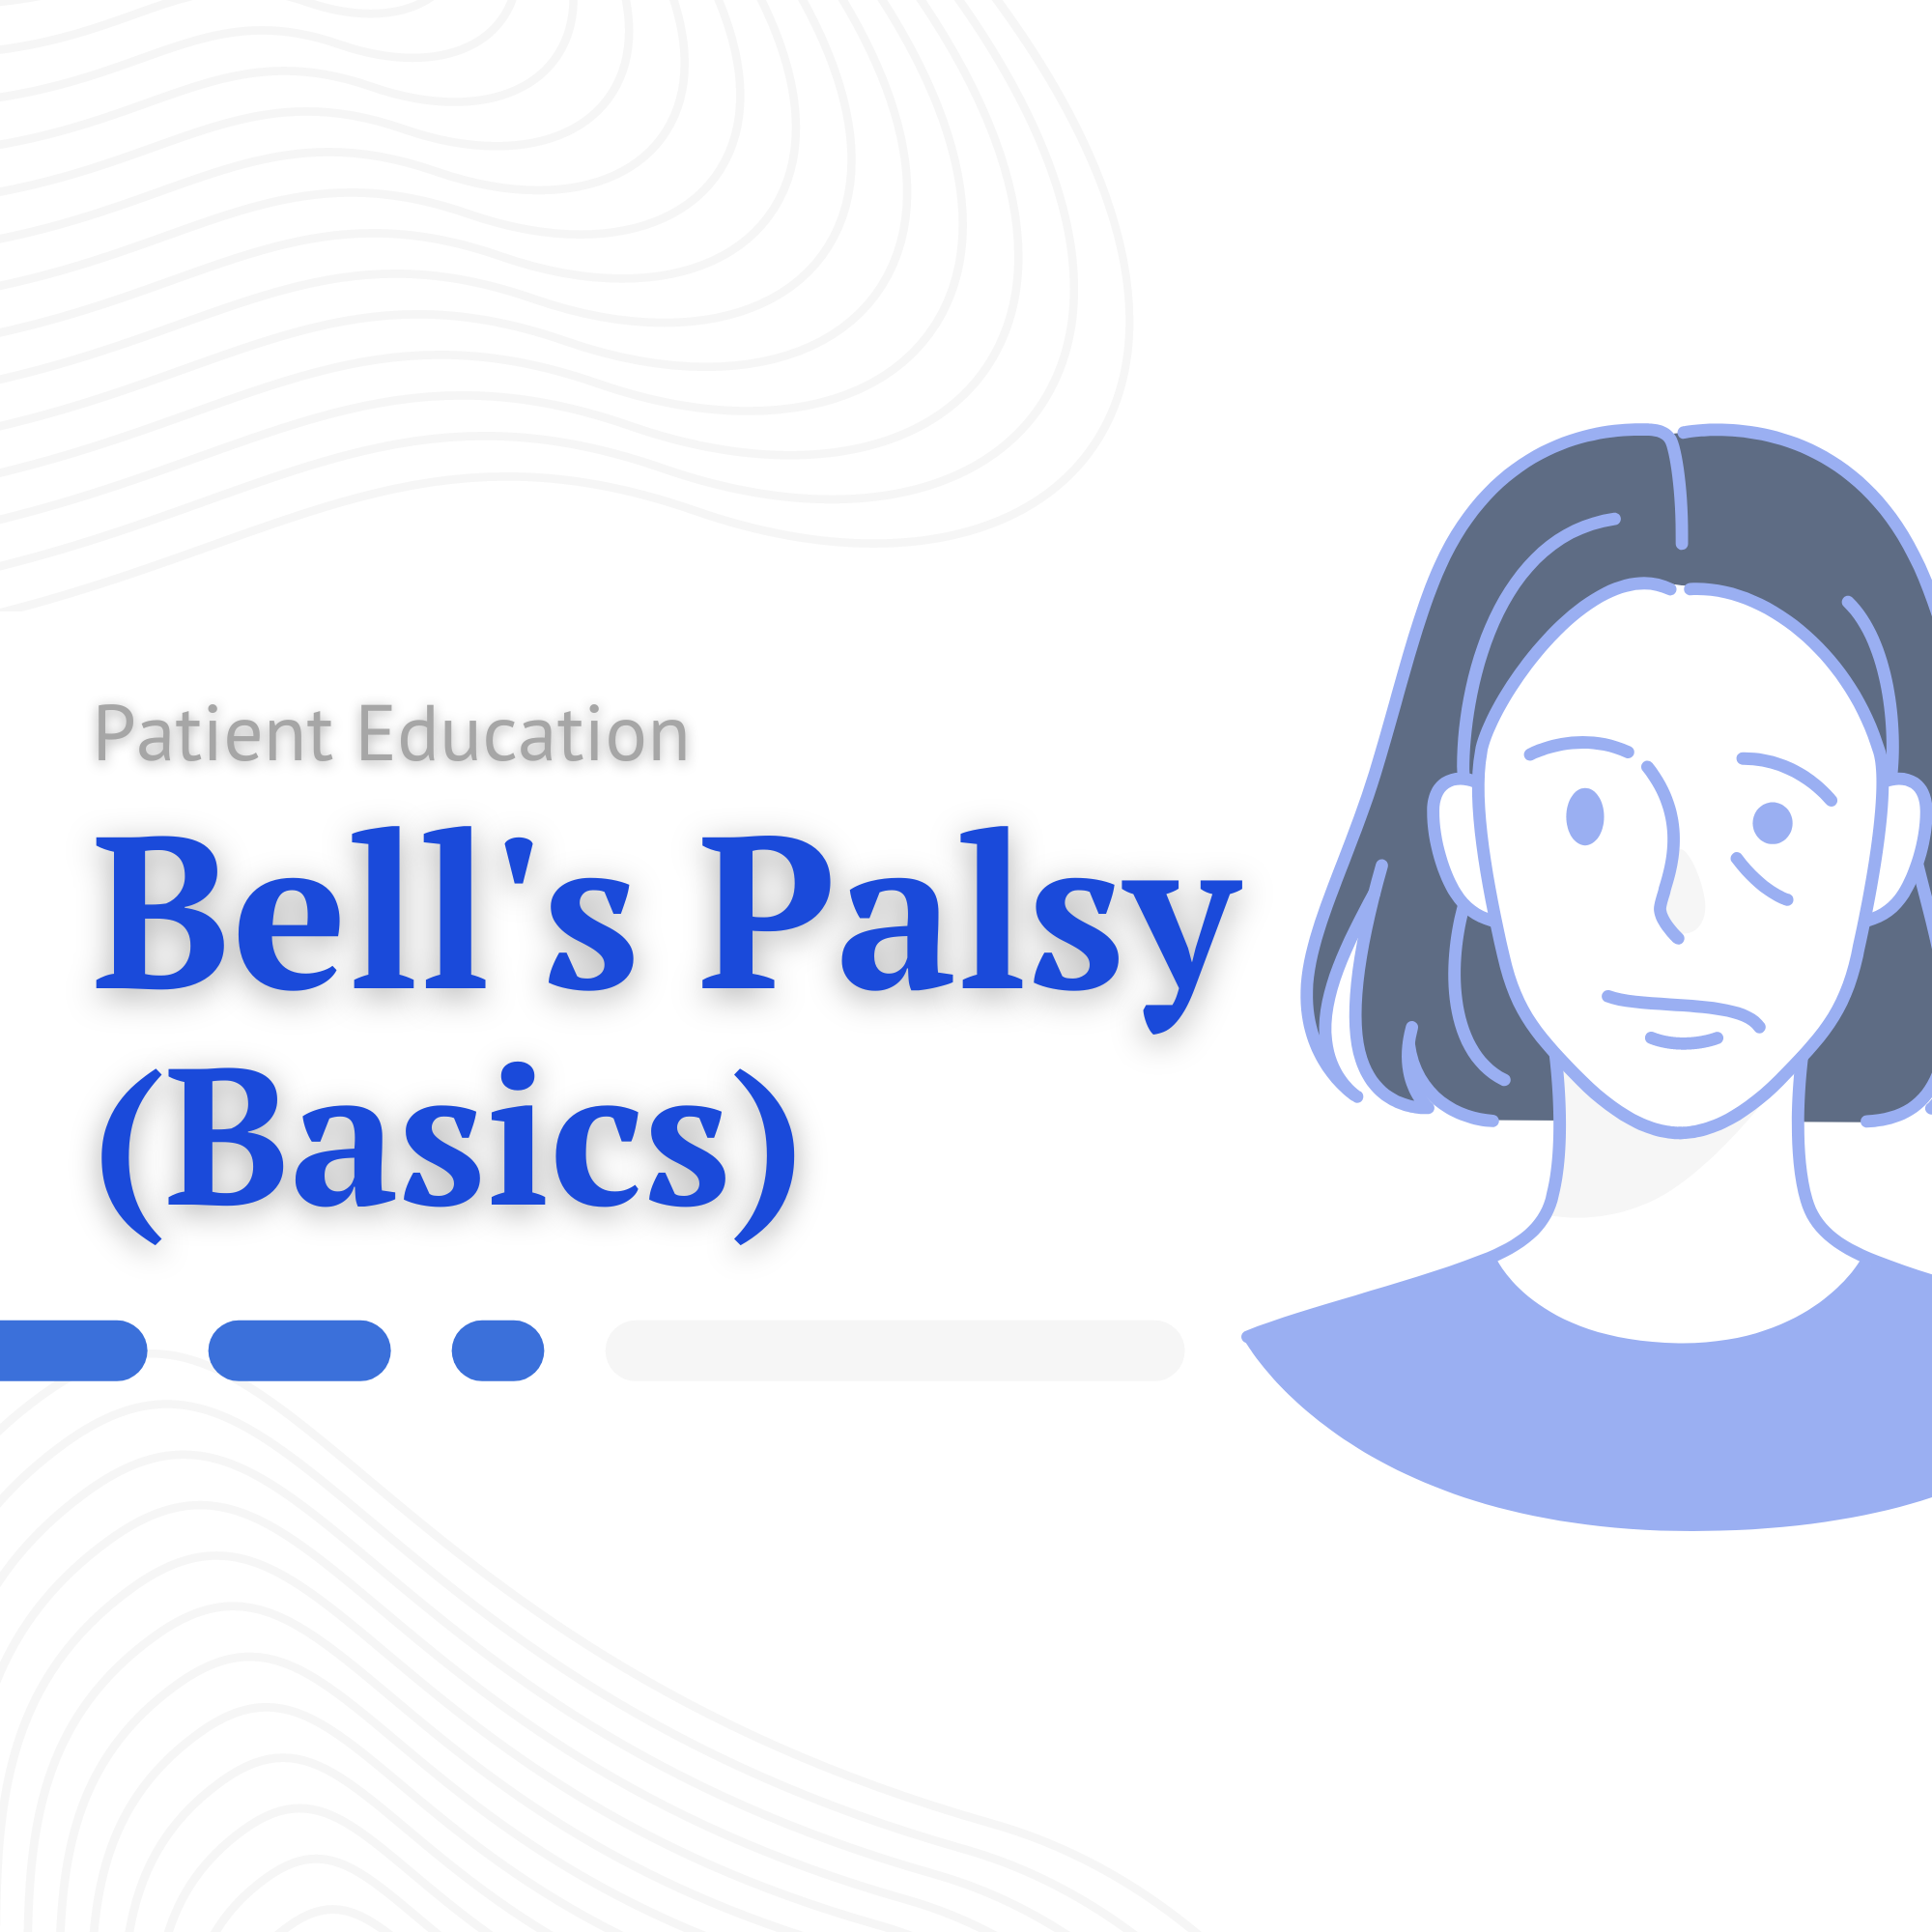 Bell's Palsy Cover Photo.png